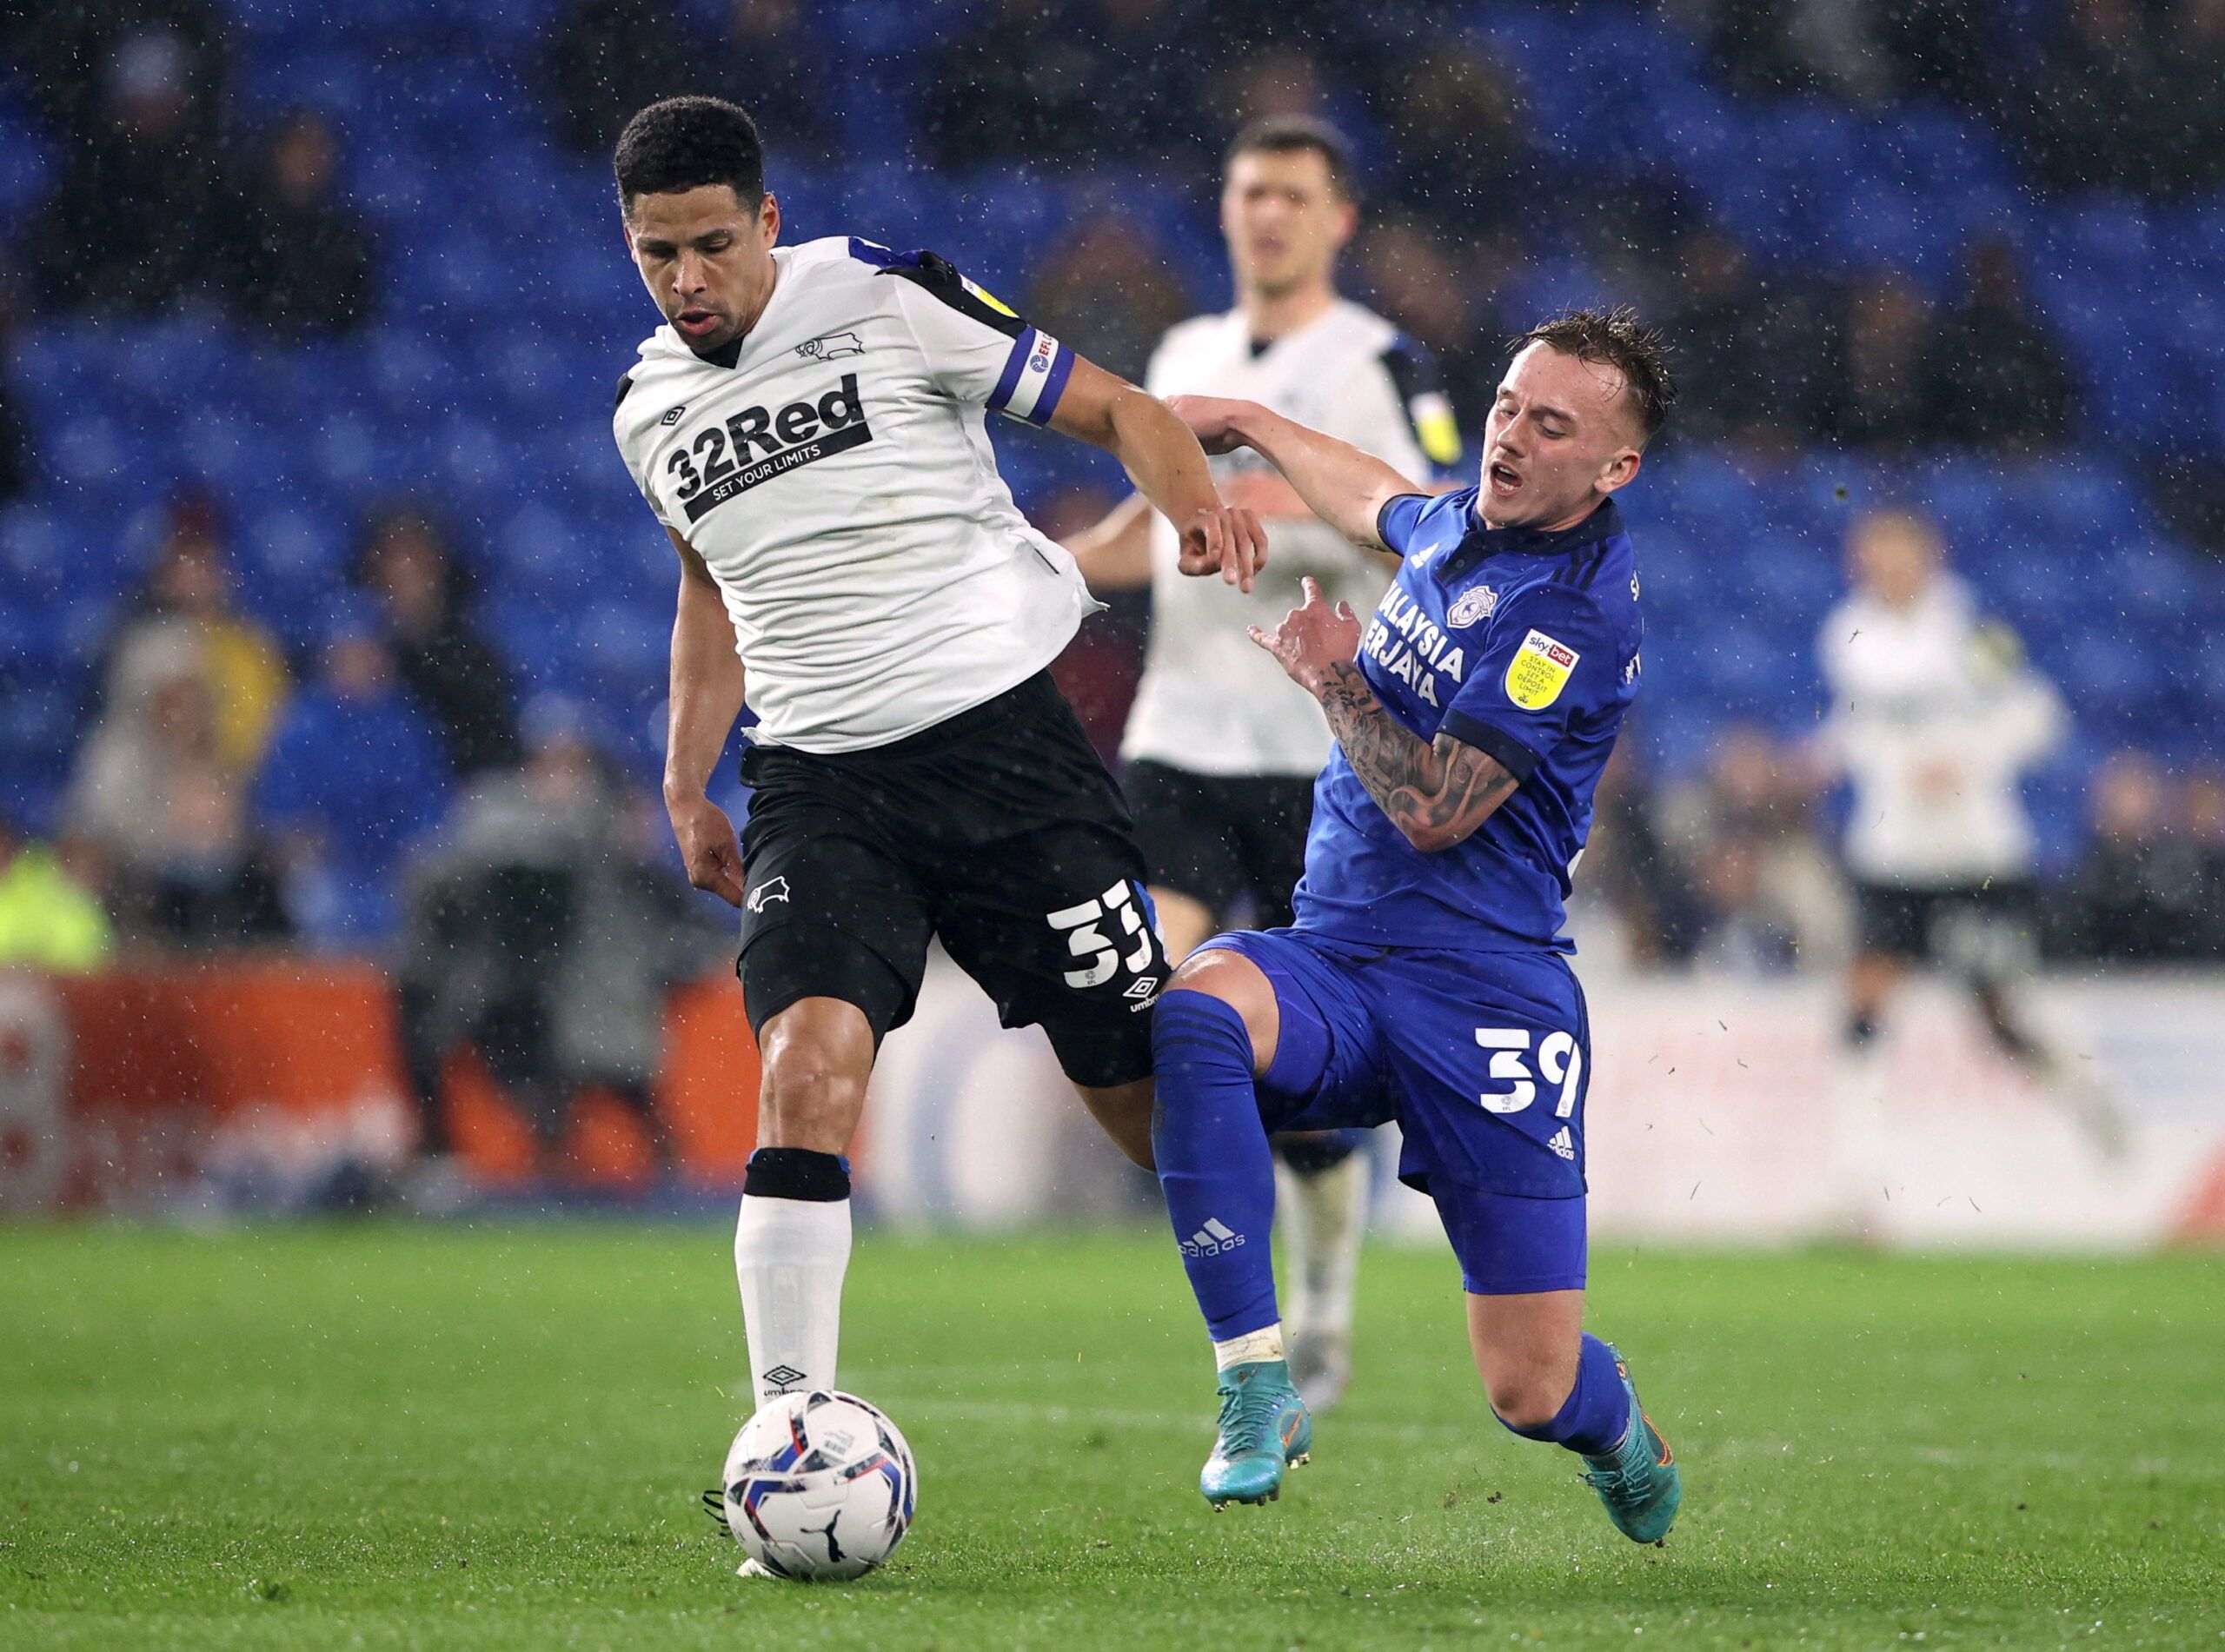 Soccer Football - Championship - Cardiff City v Derby County - Cardiff City Stadium, Cardiff, Britain - March 1, 2022   Derby County's Curtis Davies in action with Cardiff City's Isaac Davies   Action Images/Molly Darlington    EDITORIAL USE ONLY. No use with unauthorized audio, video, data, fixture lists, club/league logos or 